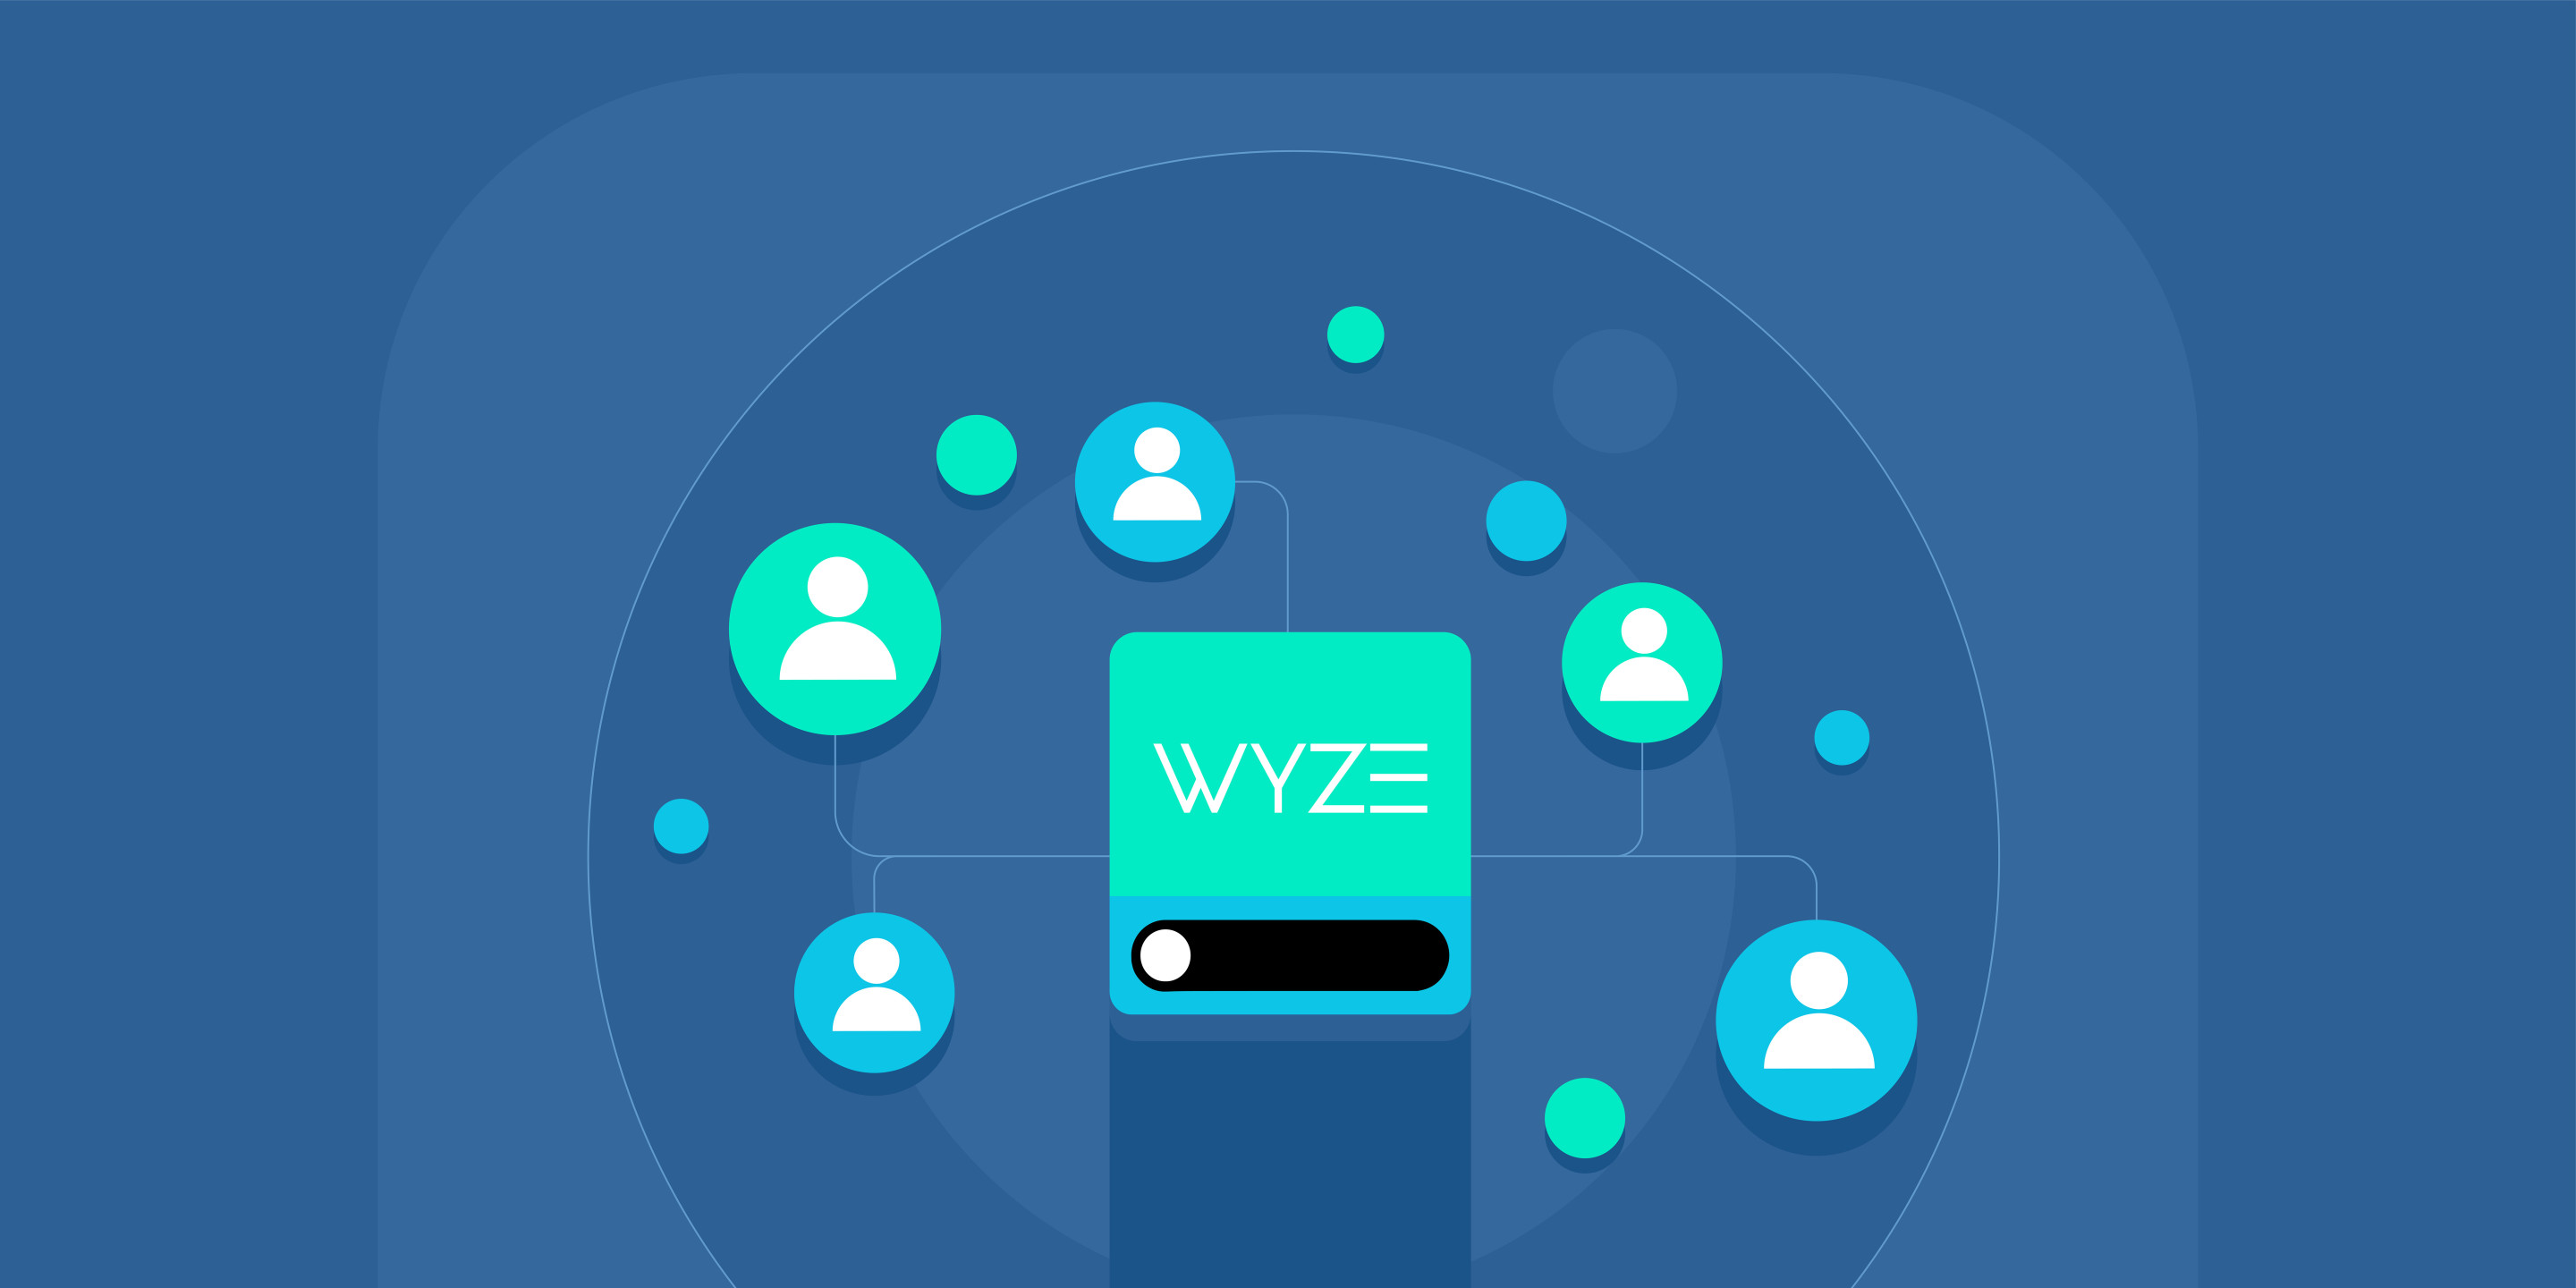 Wyze cameras, lights, and action